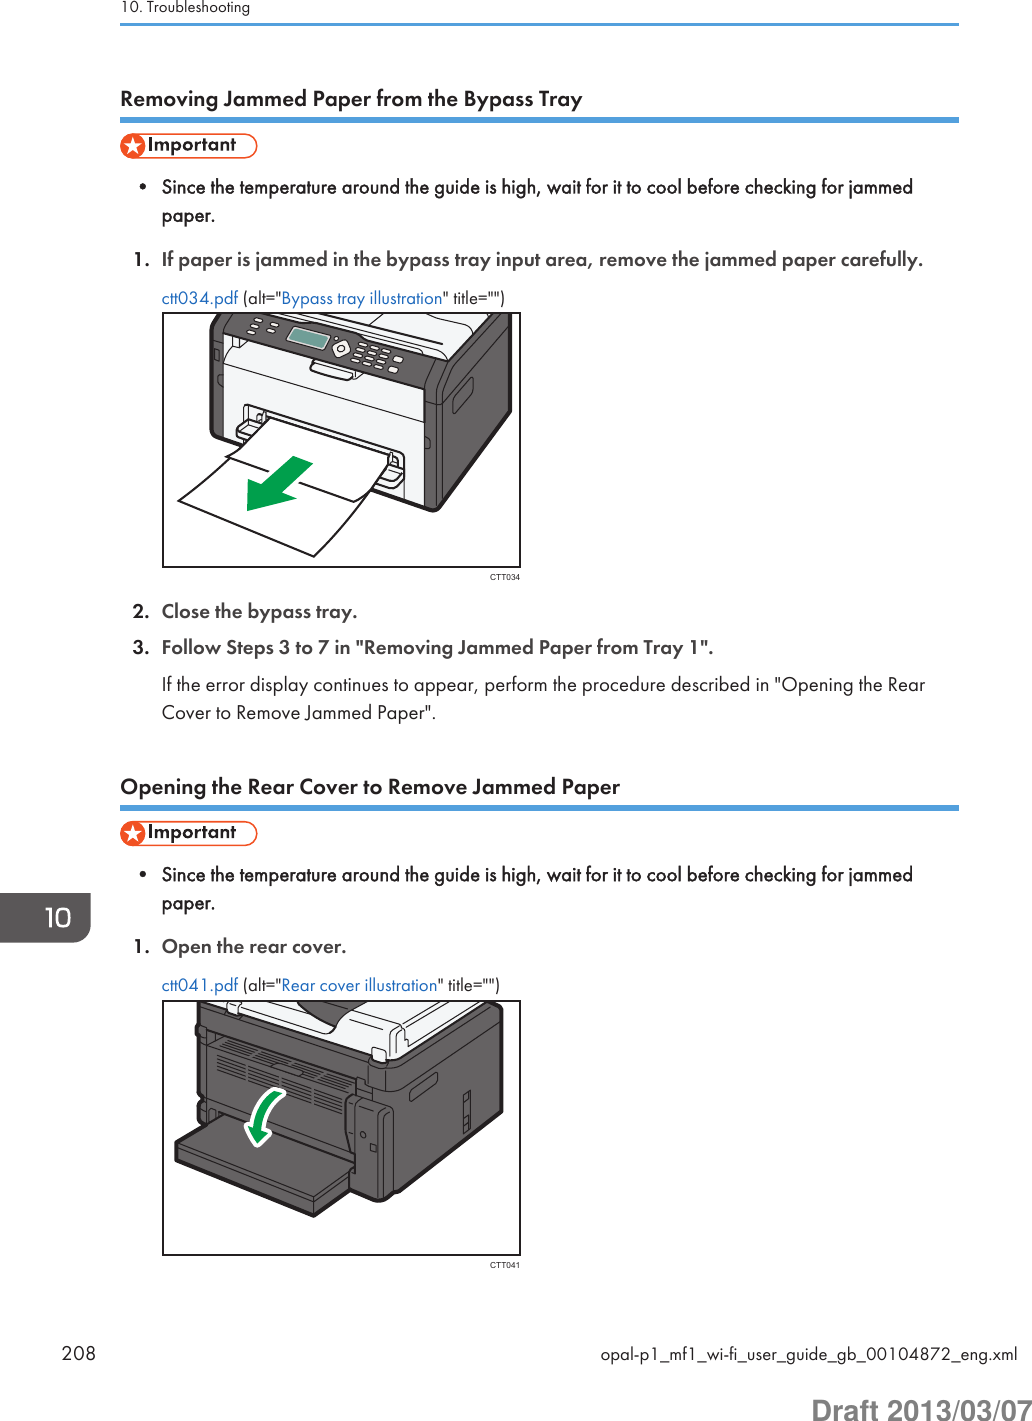 Removing Jammed Paper from the Bypass Tray• Since the temperature around the guide is high, wait for it to cool before checking for jammedpaper.1. If paper is jammed in the bypass tray input area, remove the jammed paper carefully.ctt034.pdf (alt=&quot;Bypass tray illustration&quot; title=&quot;&quot;)CTT0342. Close the bypass tray.3. Follow Steps 3 to 7 in &quot;Removing Jammed Paper from Tray 1&quot;.If the error display continues to appear, perform the procedure described in &quot;Opening the RearCover to Remove Jammed Paper&quot;.Opening the Rear Cover to Remove Jammed Paper• Since the temperature around the guide is high, wait for it to cool before checking for jammedpaper.1. Open the rear cover.ctt041.pdf (alt=&quot;Rear cover illustration&quot; title=&quot;&quot;)CTT04110. Troubleshooting208 opal-p1_mf1_wi-fi_user_guide_gb_00104872_eng.xmlDraft 2013/03/07